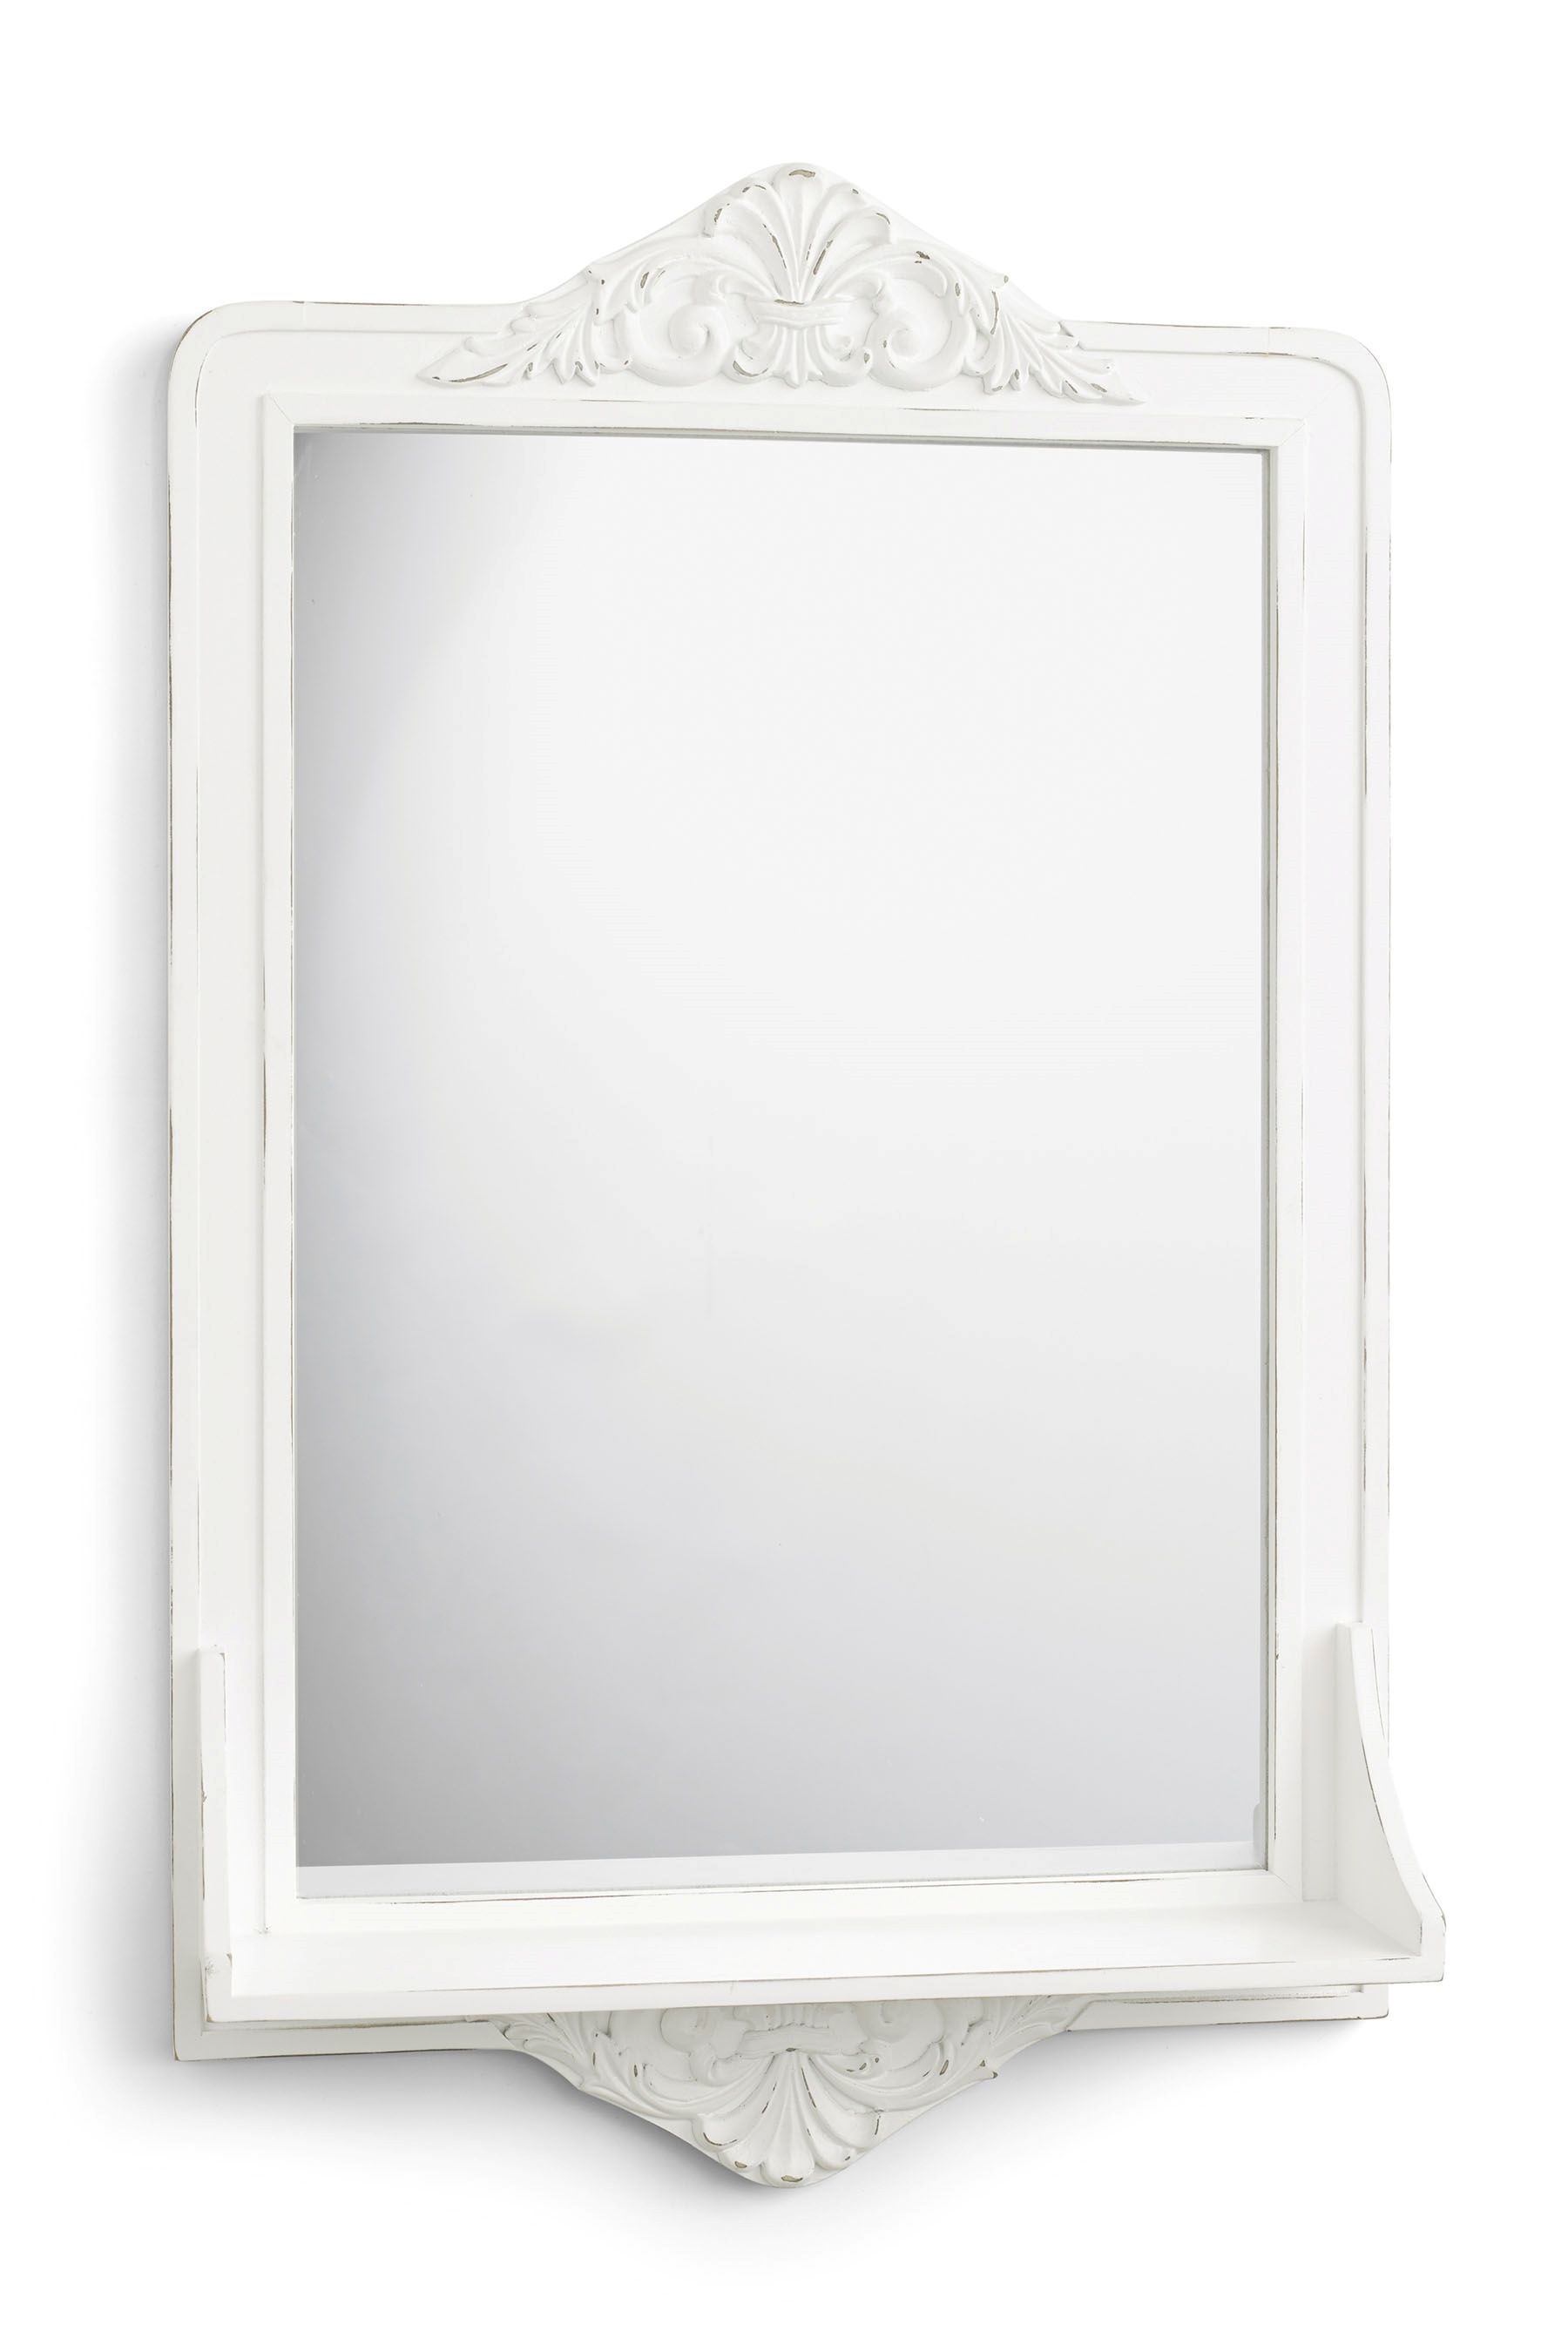 Buy Scroll Mirror Shelf From The Next Uk Online Shop Bathroom With Mirror Online Shop (View 10 of 15)